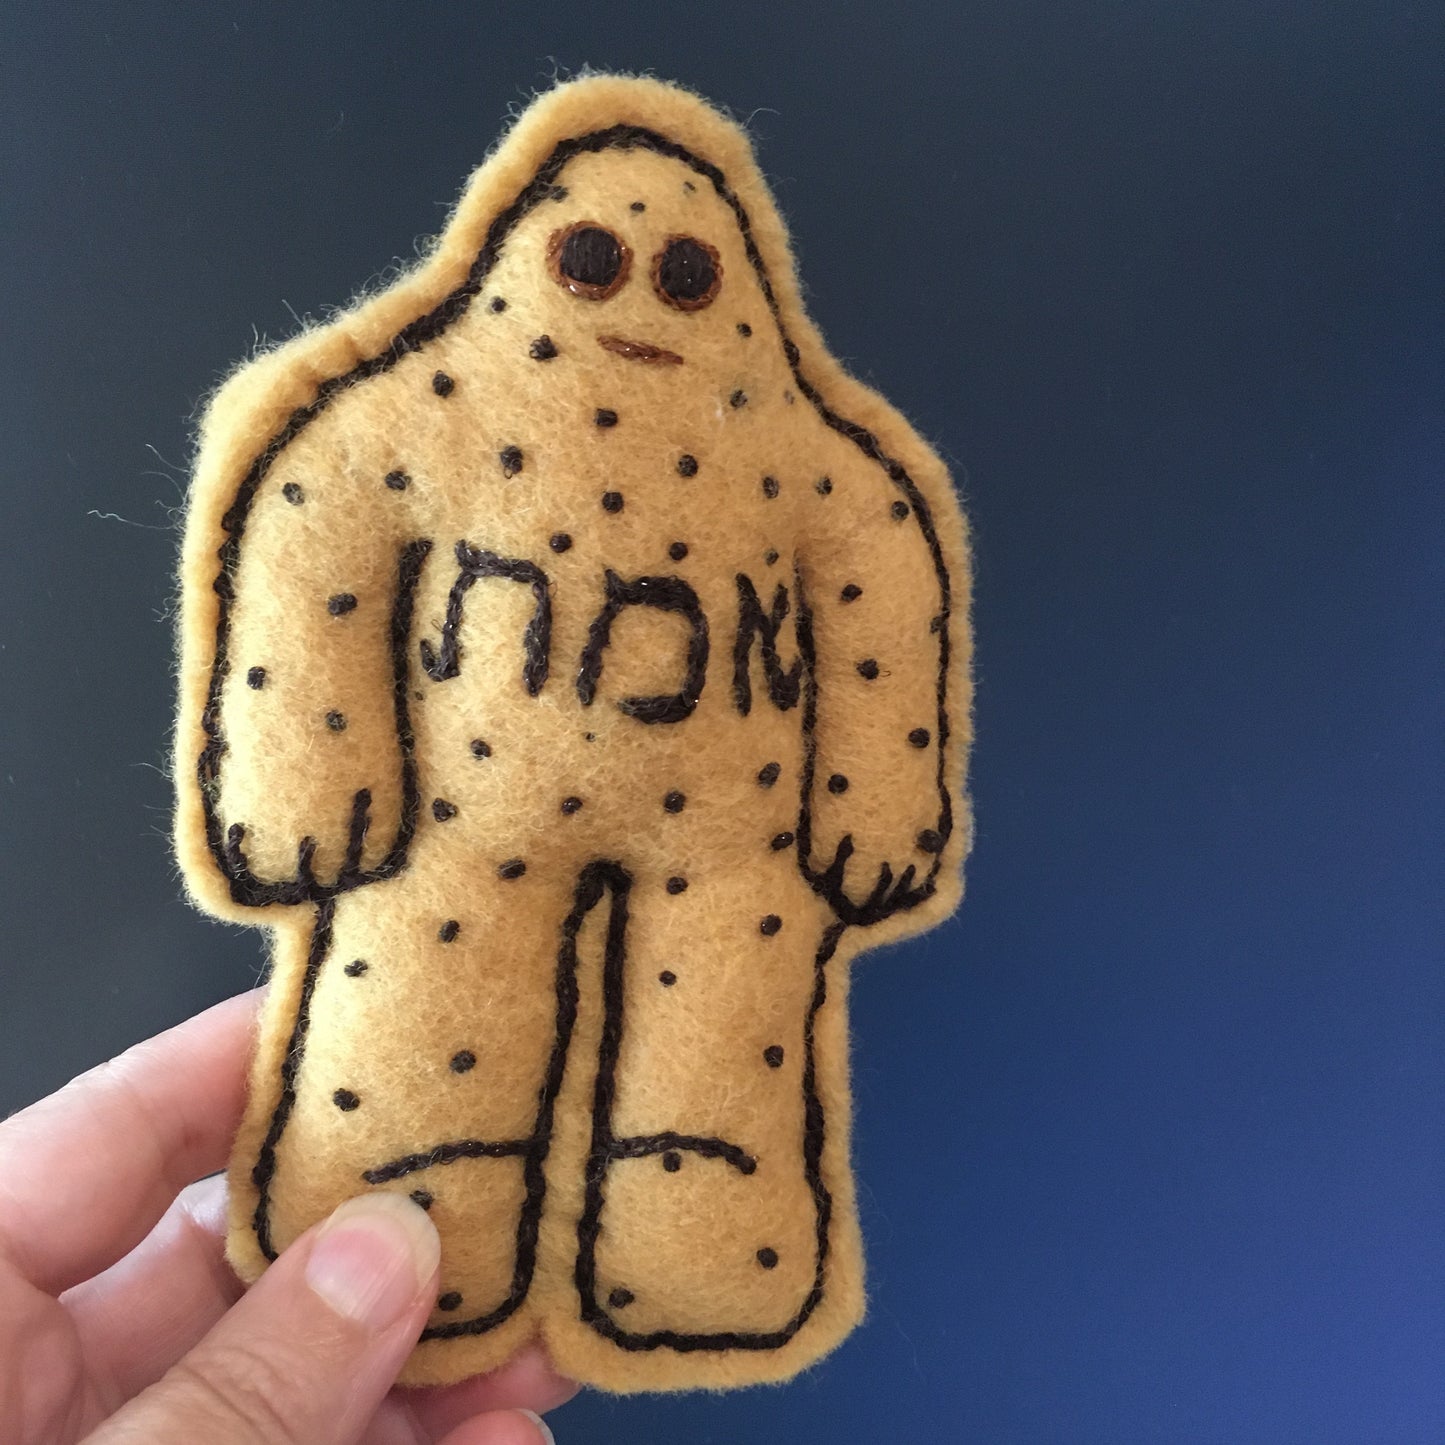 Made to Order | Chocolate Chip Cookie Golem/et | 10th Minyan